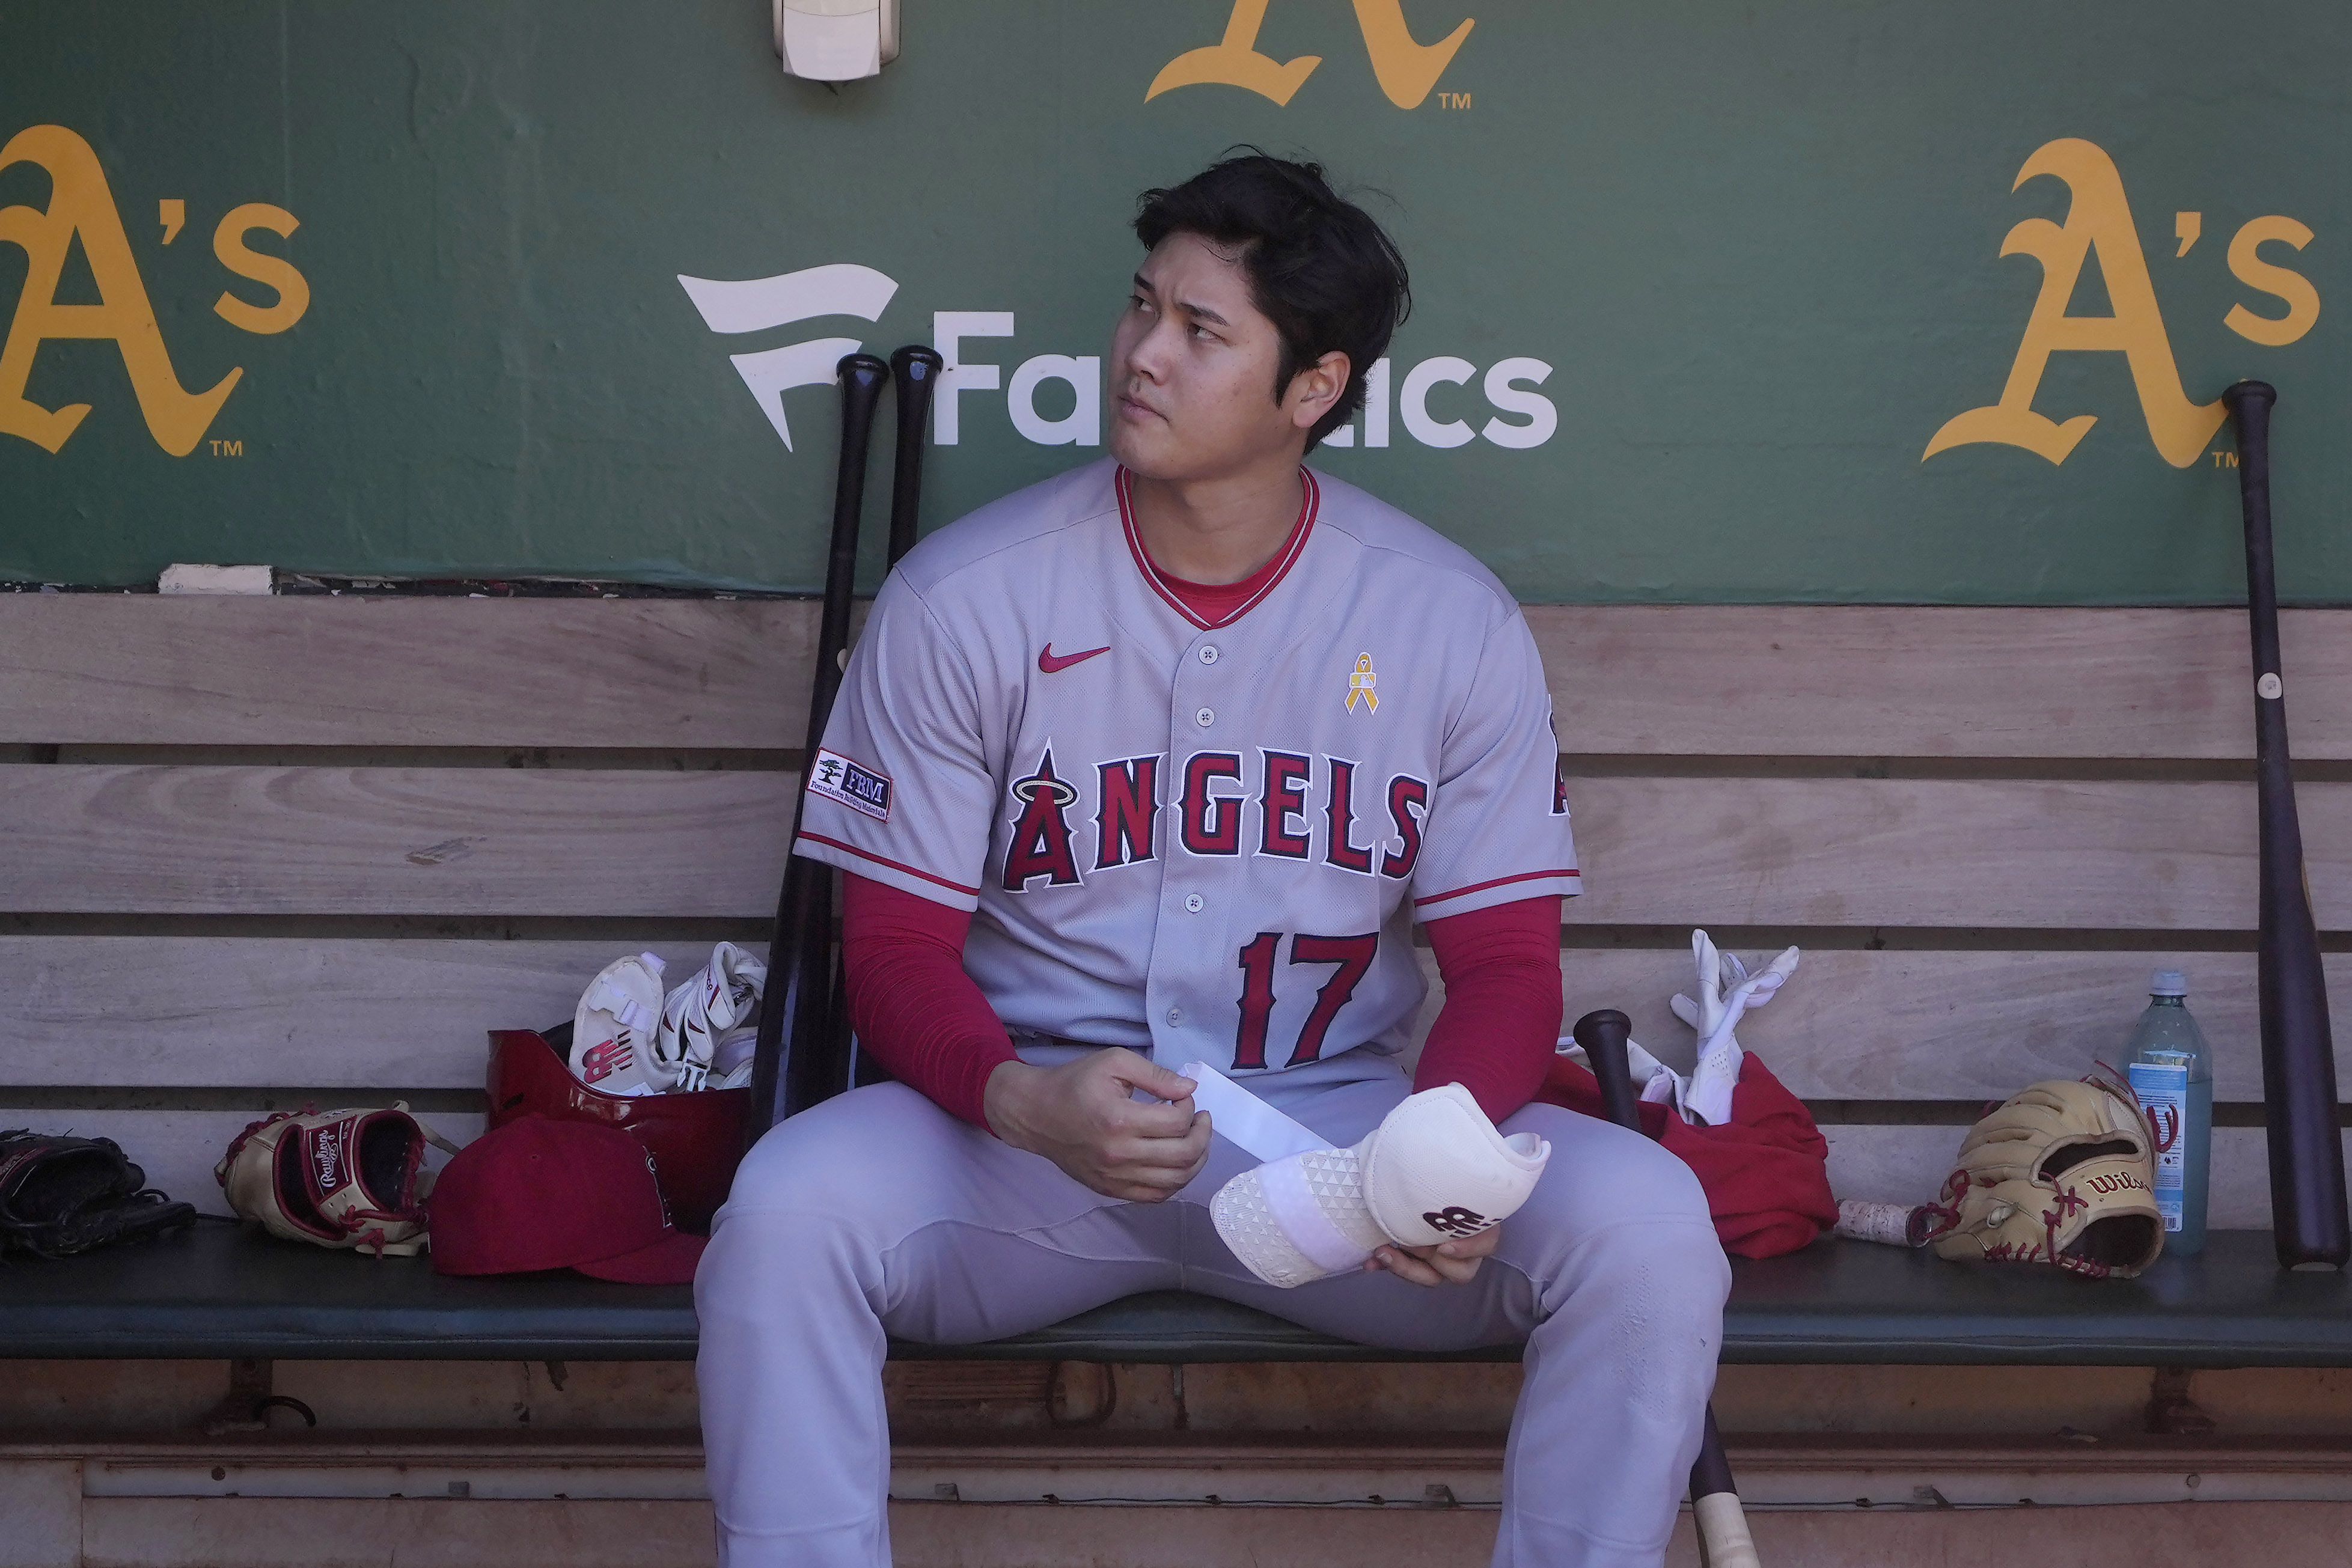 Marketing Shohei Ohtani is a popular and comprehensive experience